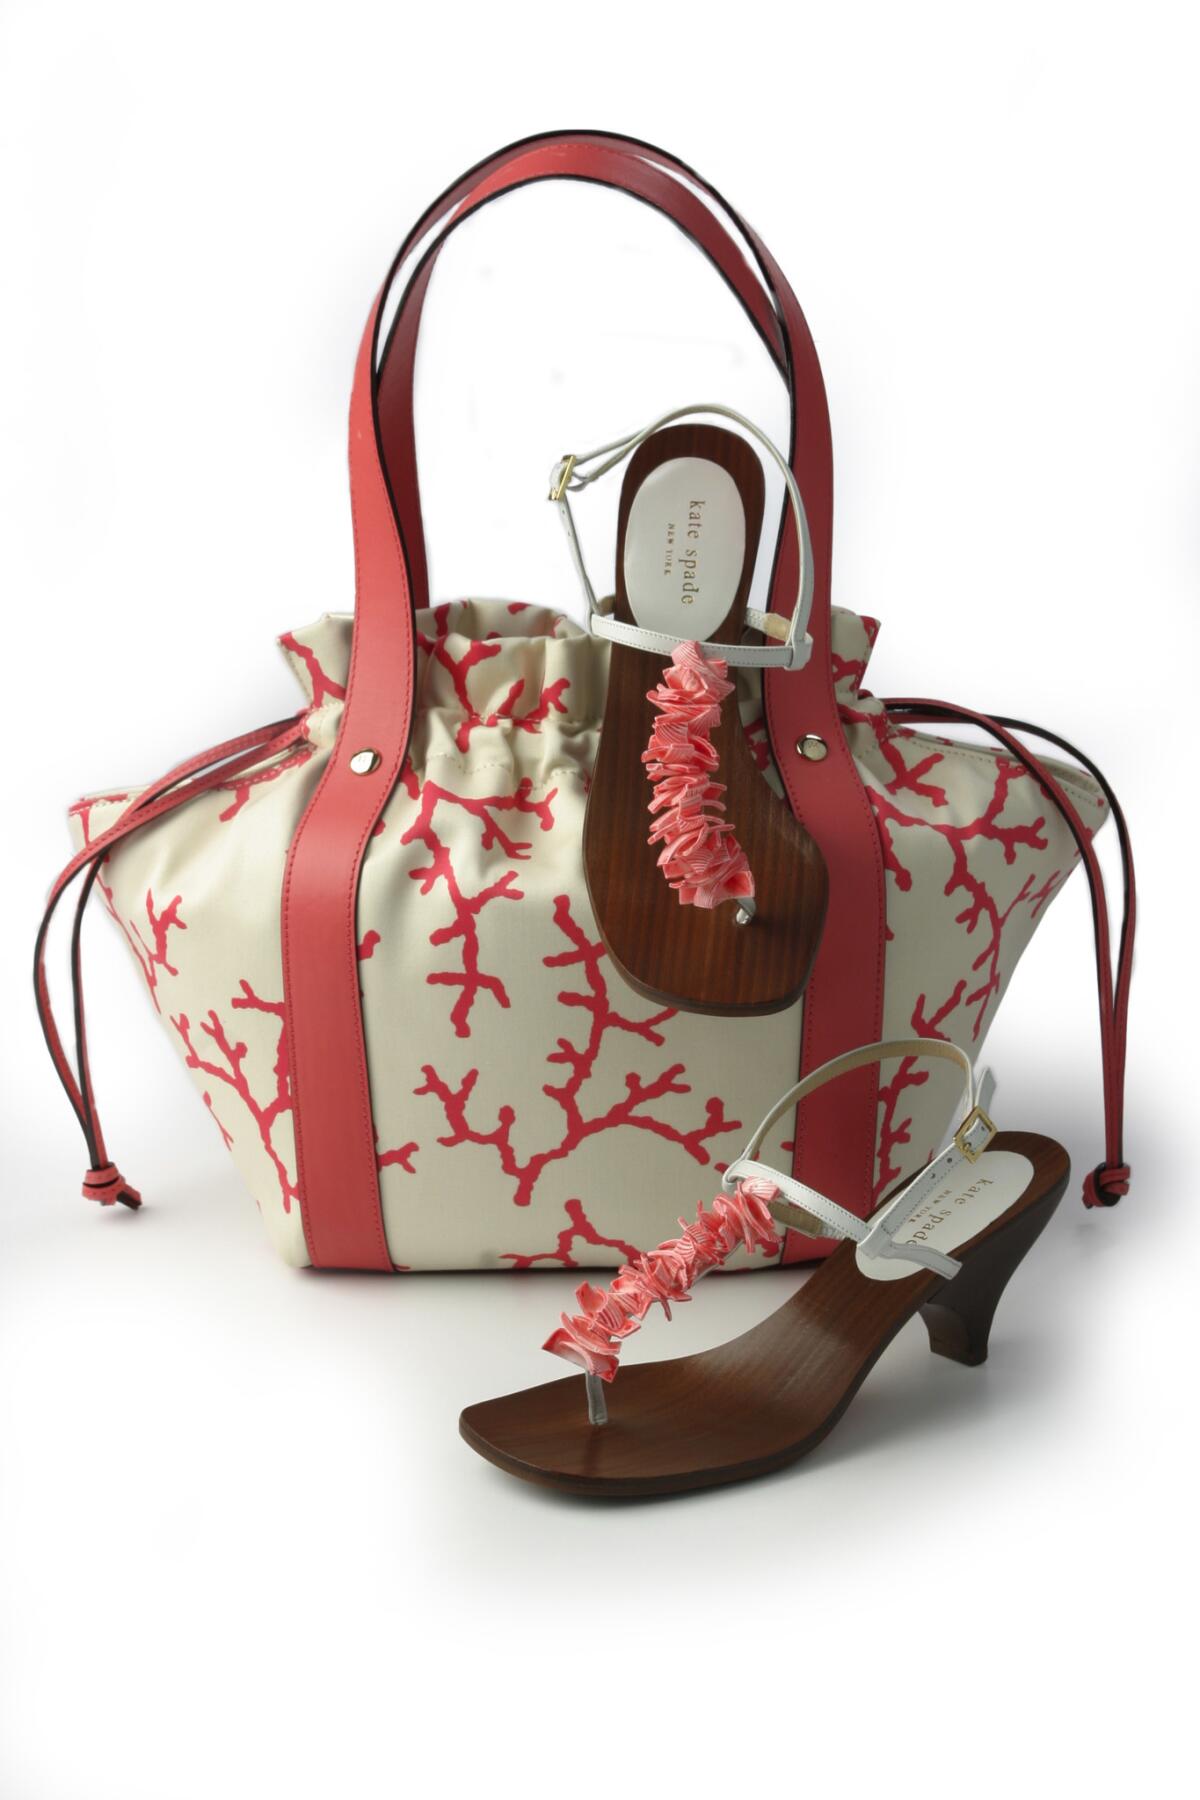 Kate Spade shoes and bag from spring 2005.